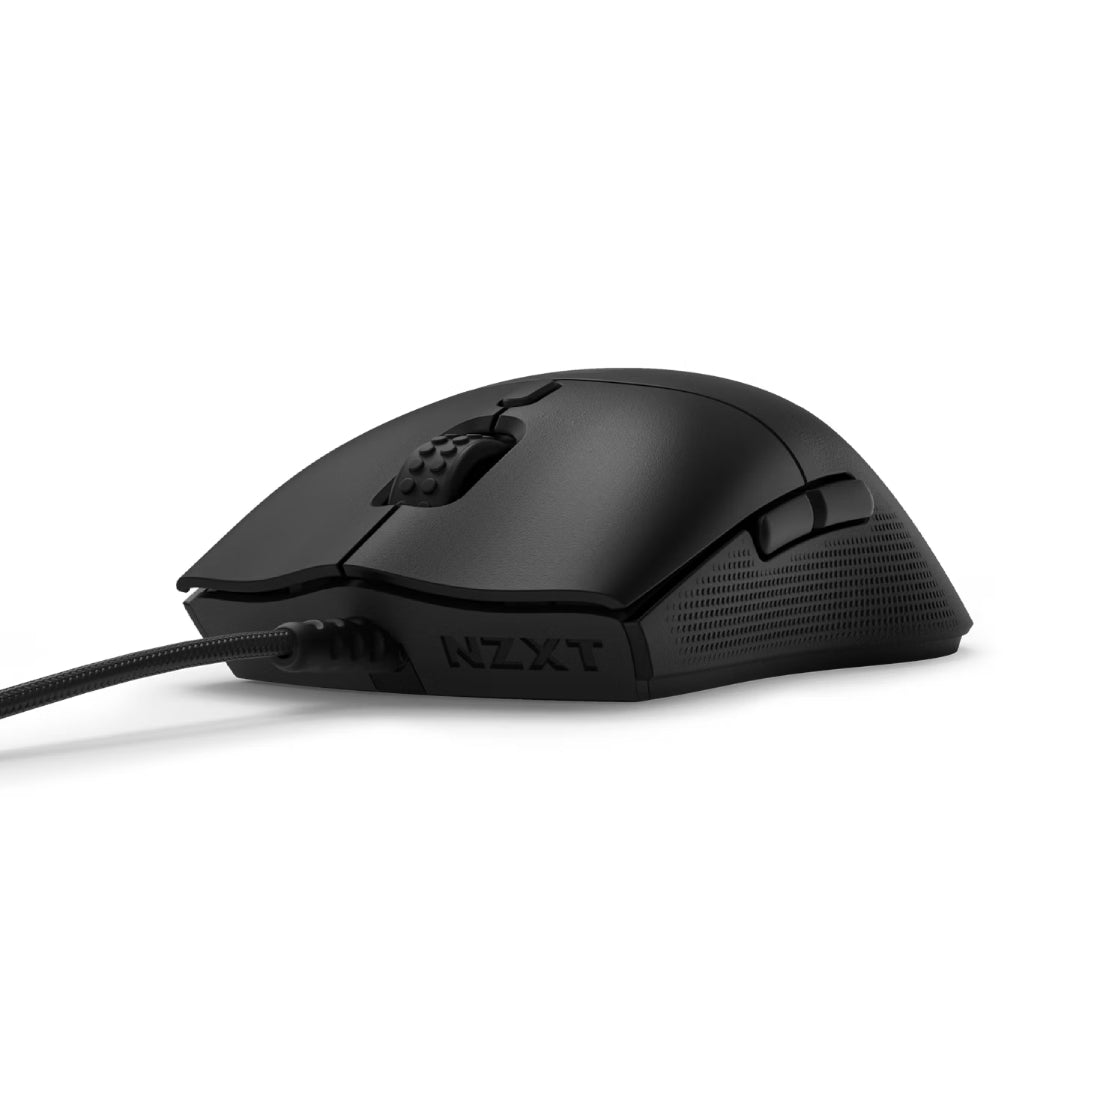 NZXT Lift 2 Symm Wired 26,000 DPI Lightweight Symmetrical Gaming Mouse - Black - فأرة - Store 974 | ستور ٩٧٤